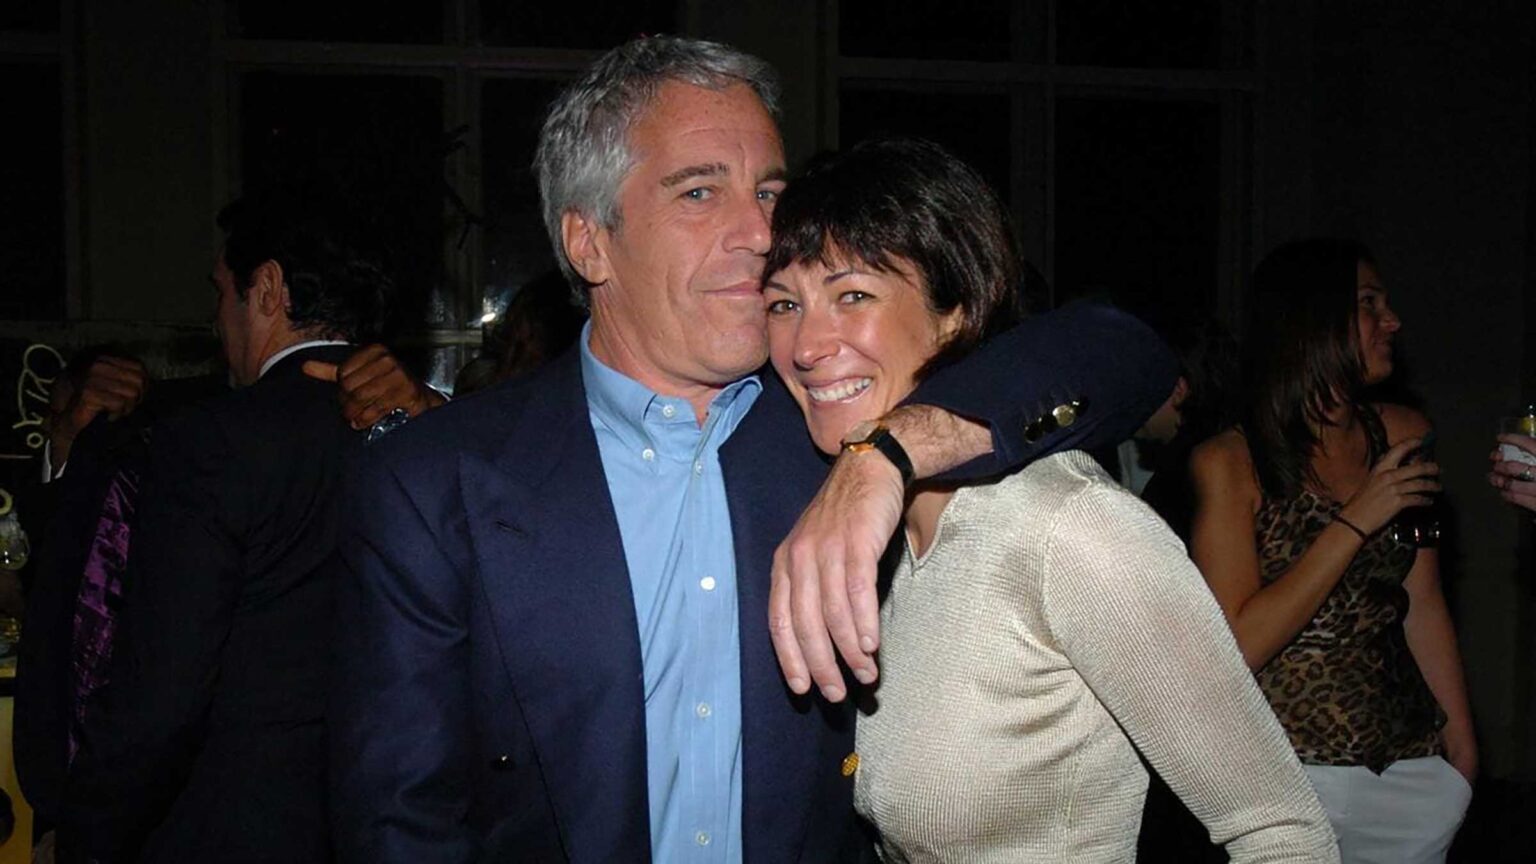 Many have speculated that Ghislaine Maxwell could be hiding out on Jeffrey Epstein’s private island. Here's what we know about the Epstein island.